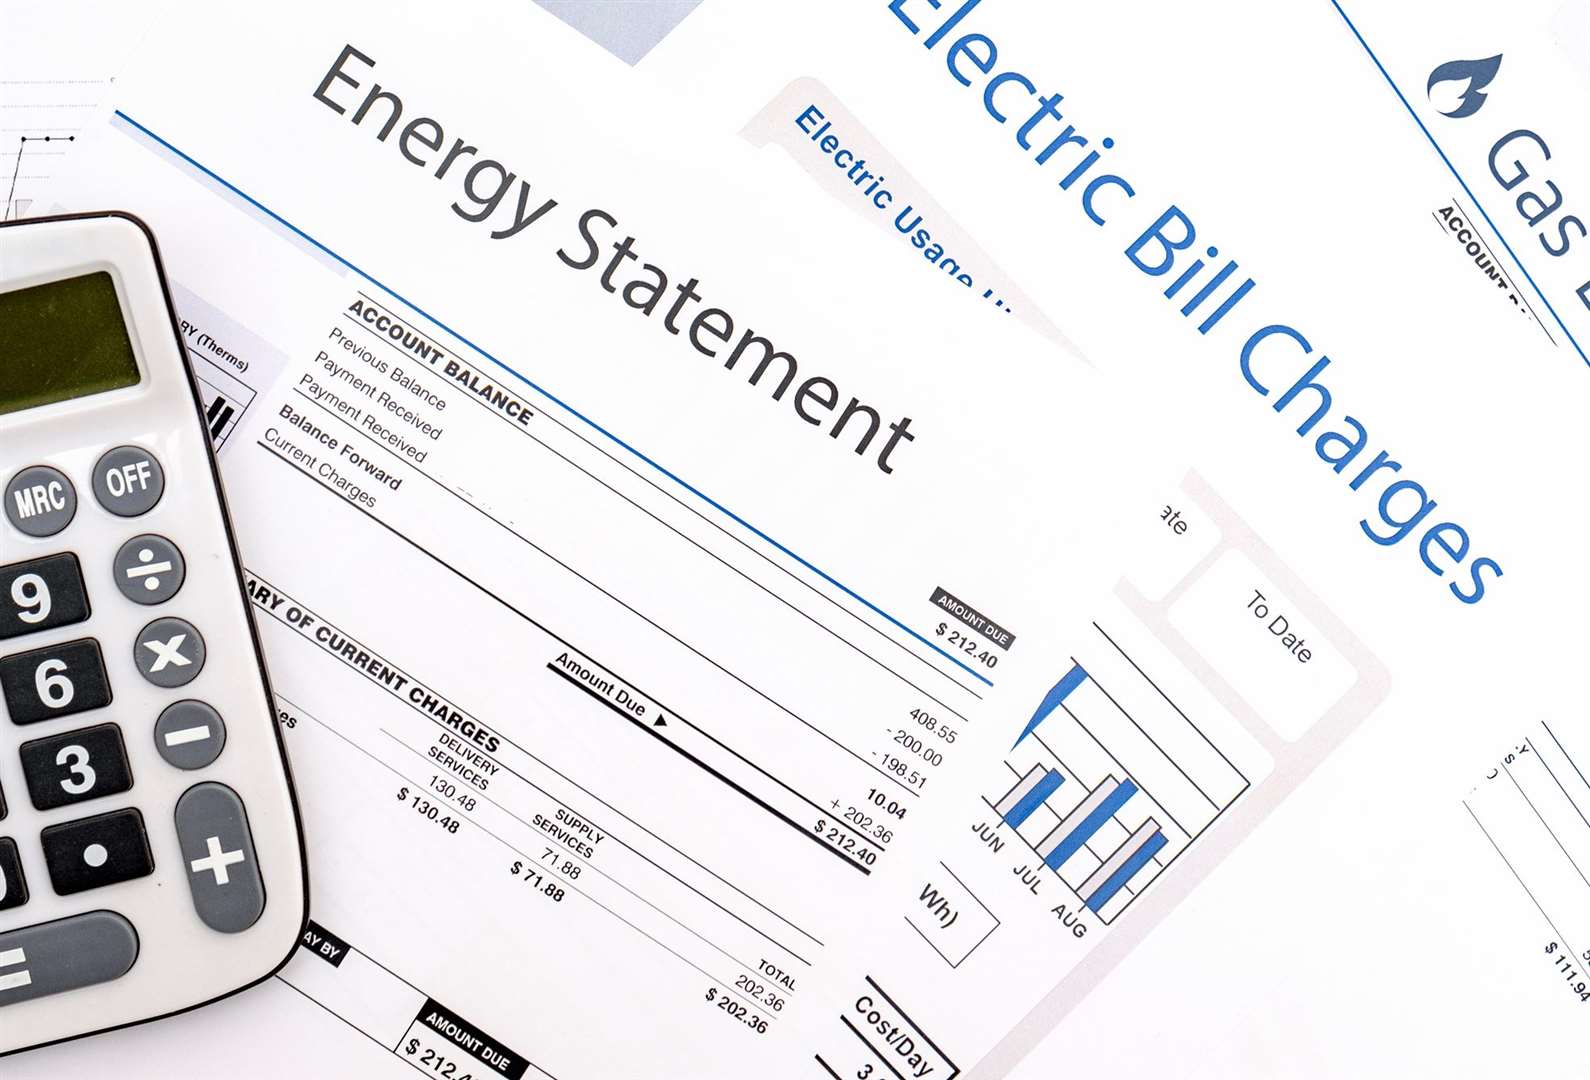 The average energy bill is about to drop by £400. Image: iStock.